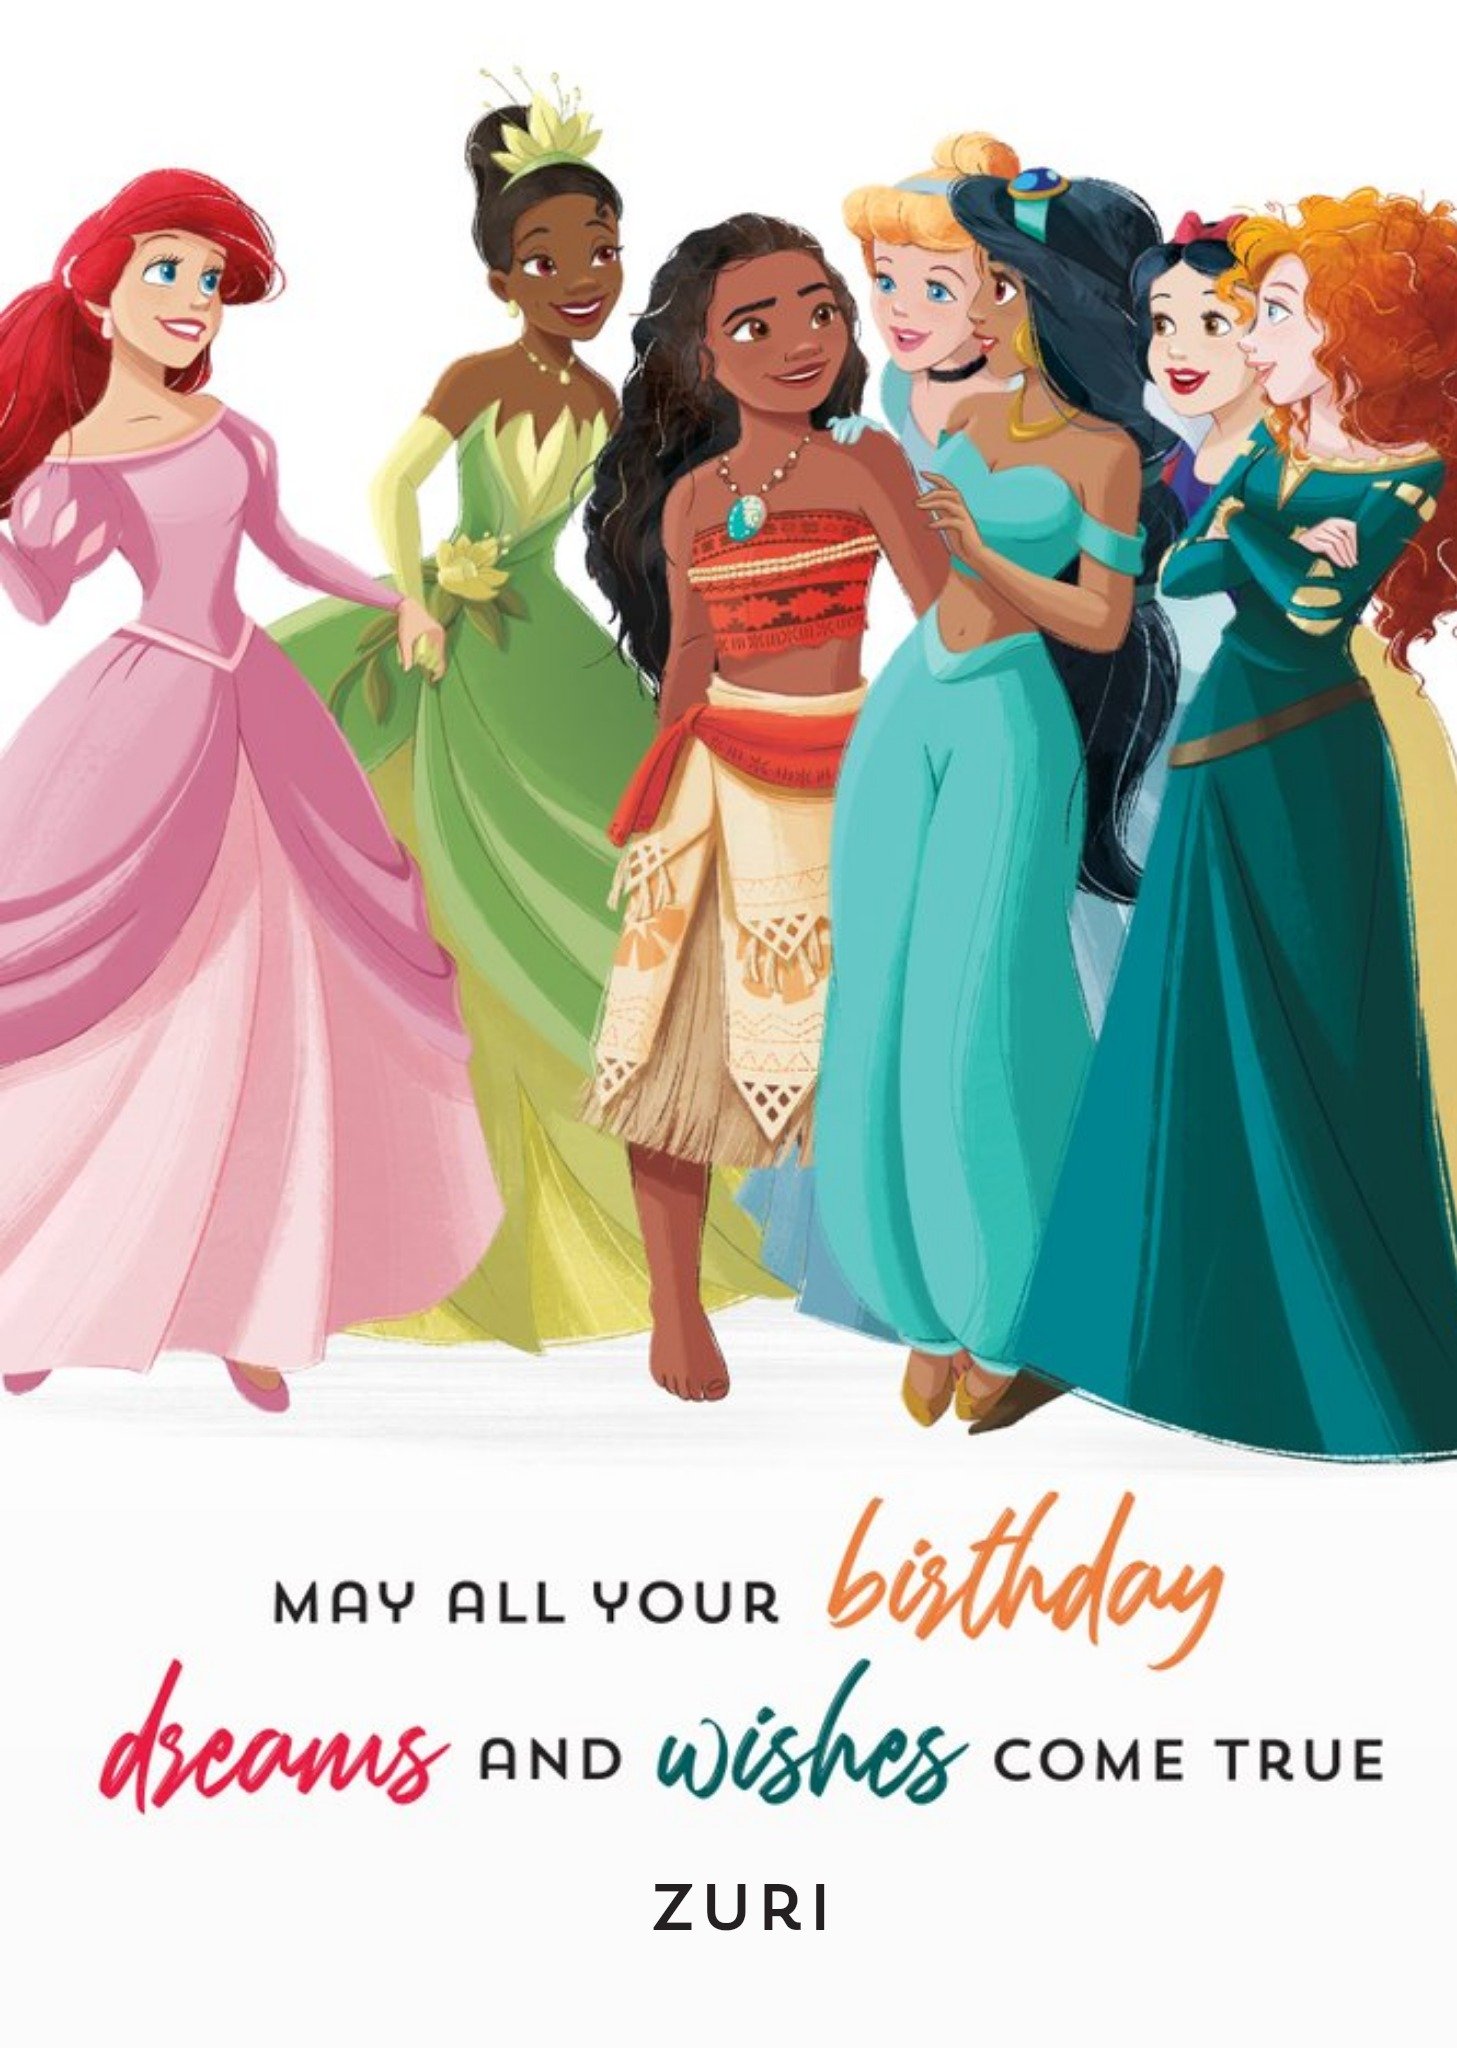 Disney Princess May All Your Birthday Dreams And Wishes Come True Card Ecard